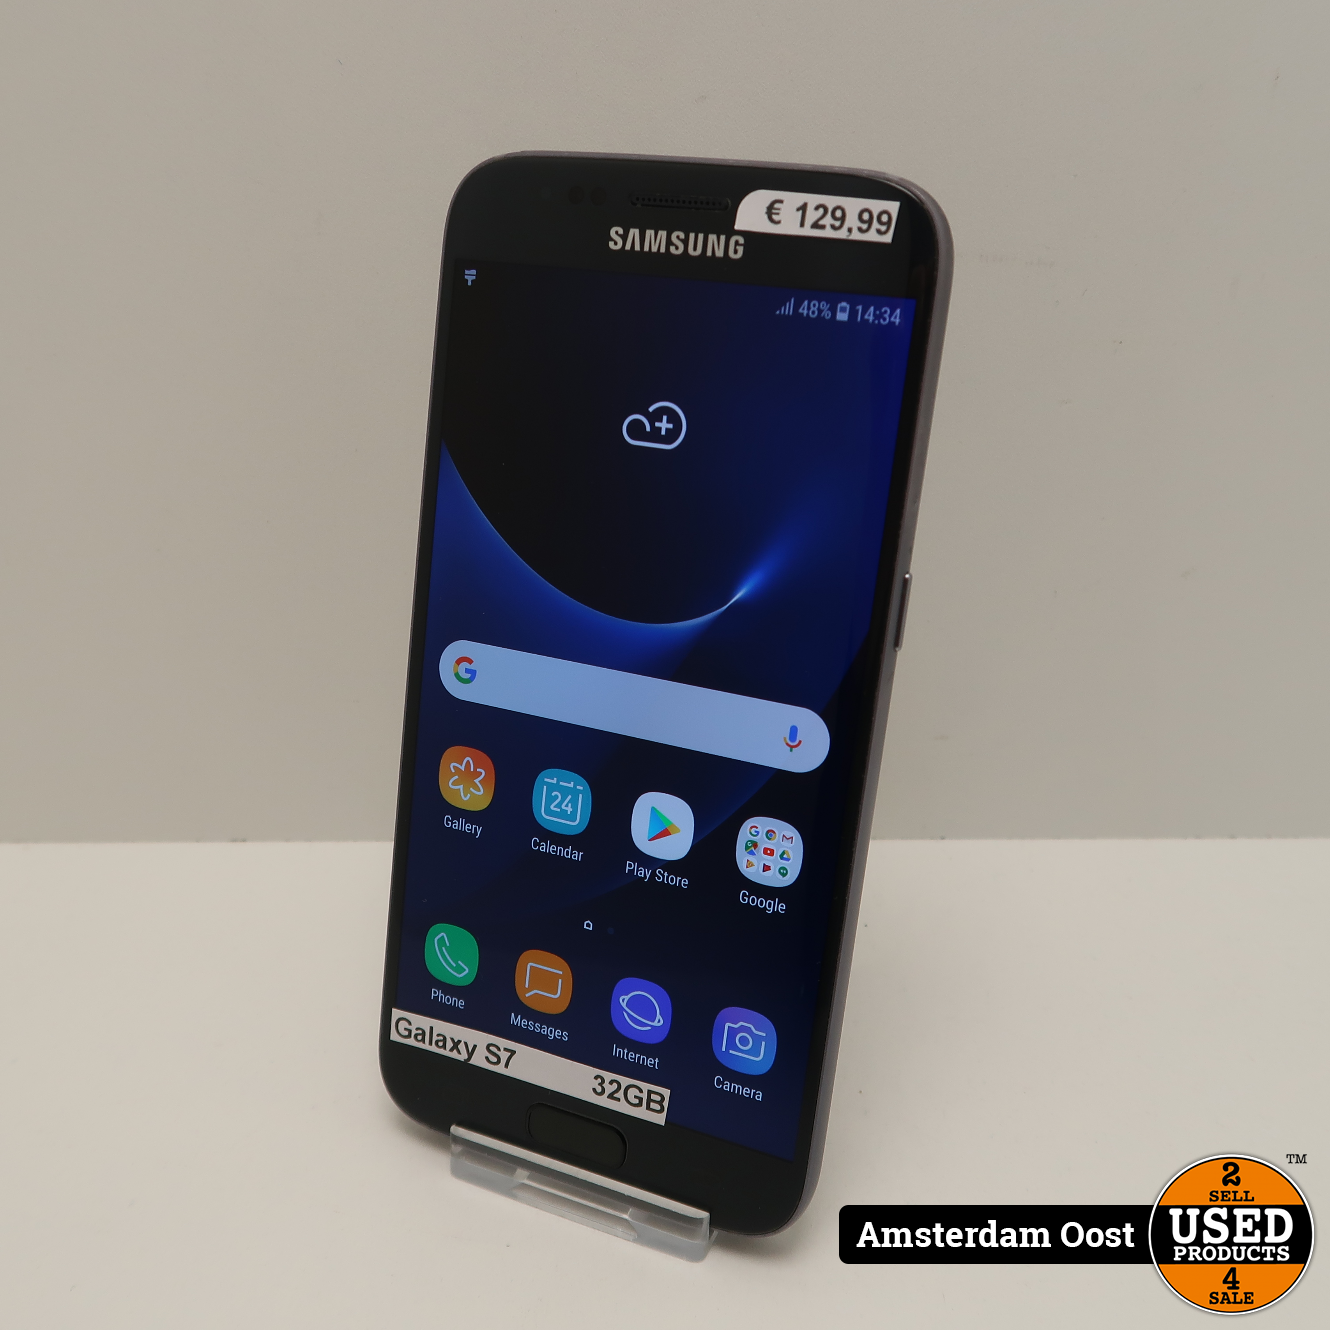 botsing mist Kaap Samsung Galaxy S7 32GB Black | in Goede Staat - Used Products Amsterdam Oost